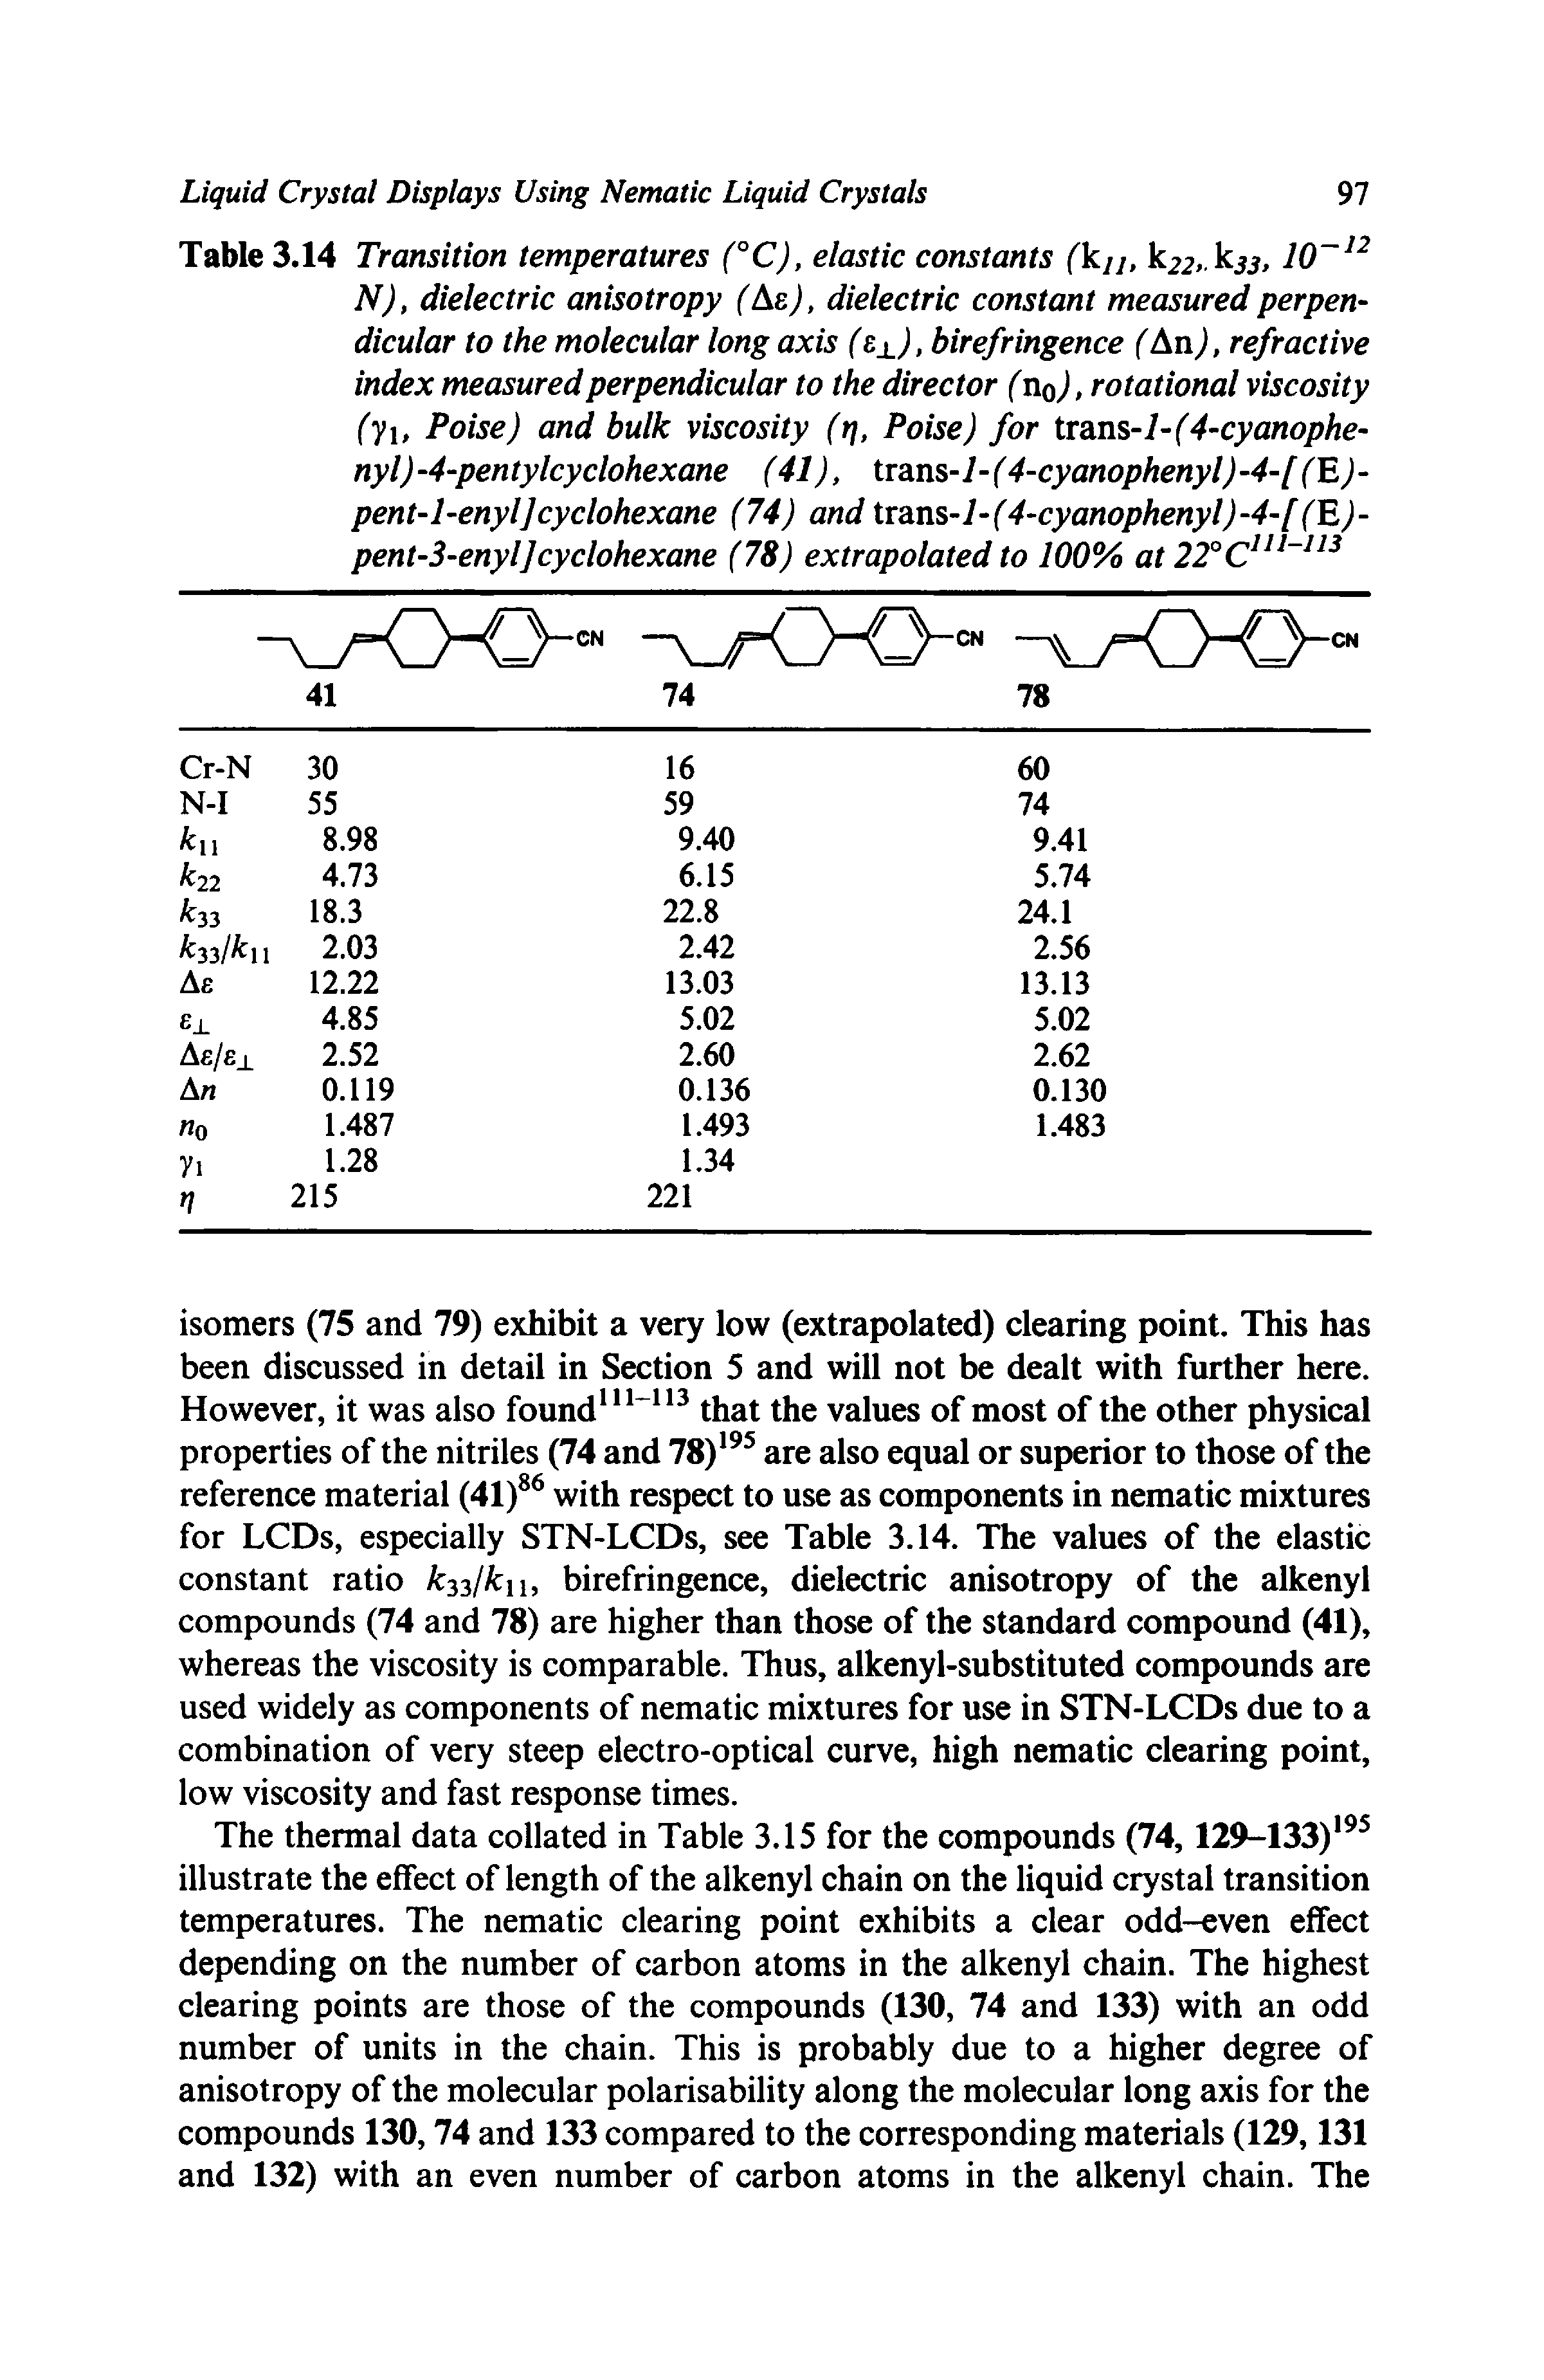 Table 3.14 Transition temperatures (°C), elastic constants fk/y, k22 kjj, 10 N), dielectric anisotropy ( e), dielectric constant measured perpendicular to the molecular long axis (e ), birefringence ( n), refractive index measured perpendicular to the director (noJ, rotational viscosity (y. Poise) and bulk viscosity (r, Poise) for tr ns-l-(4-cyanophe-nyl)-4-pentylcyclohexane (41), iTSins-l-(4-cyanophenyl)-4-[(E)-pent-l-enyl]cyclohexane (74) andtra.ns-l-(4-cyanophenyl)-4-[(E)-pent-3-enyI]cyclohexane (78) extrapolated to 100% at 22°...